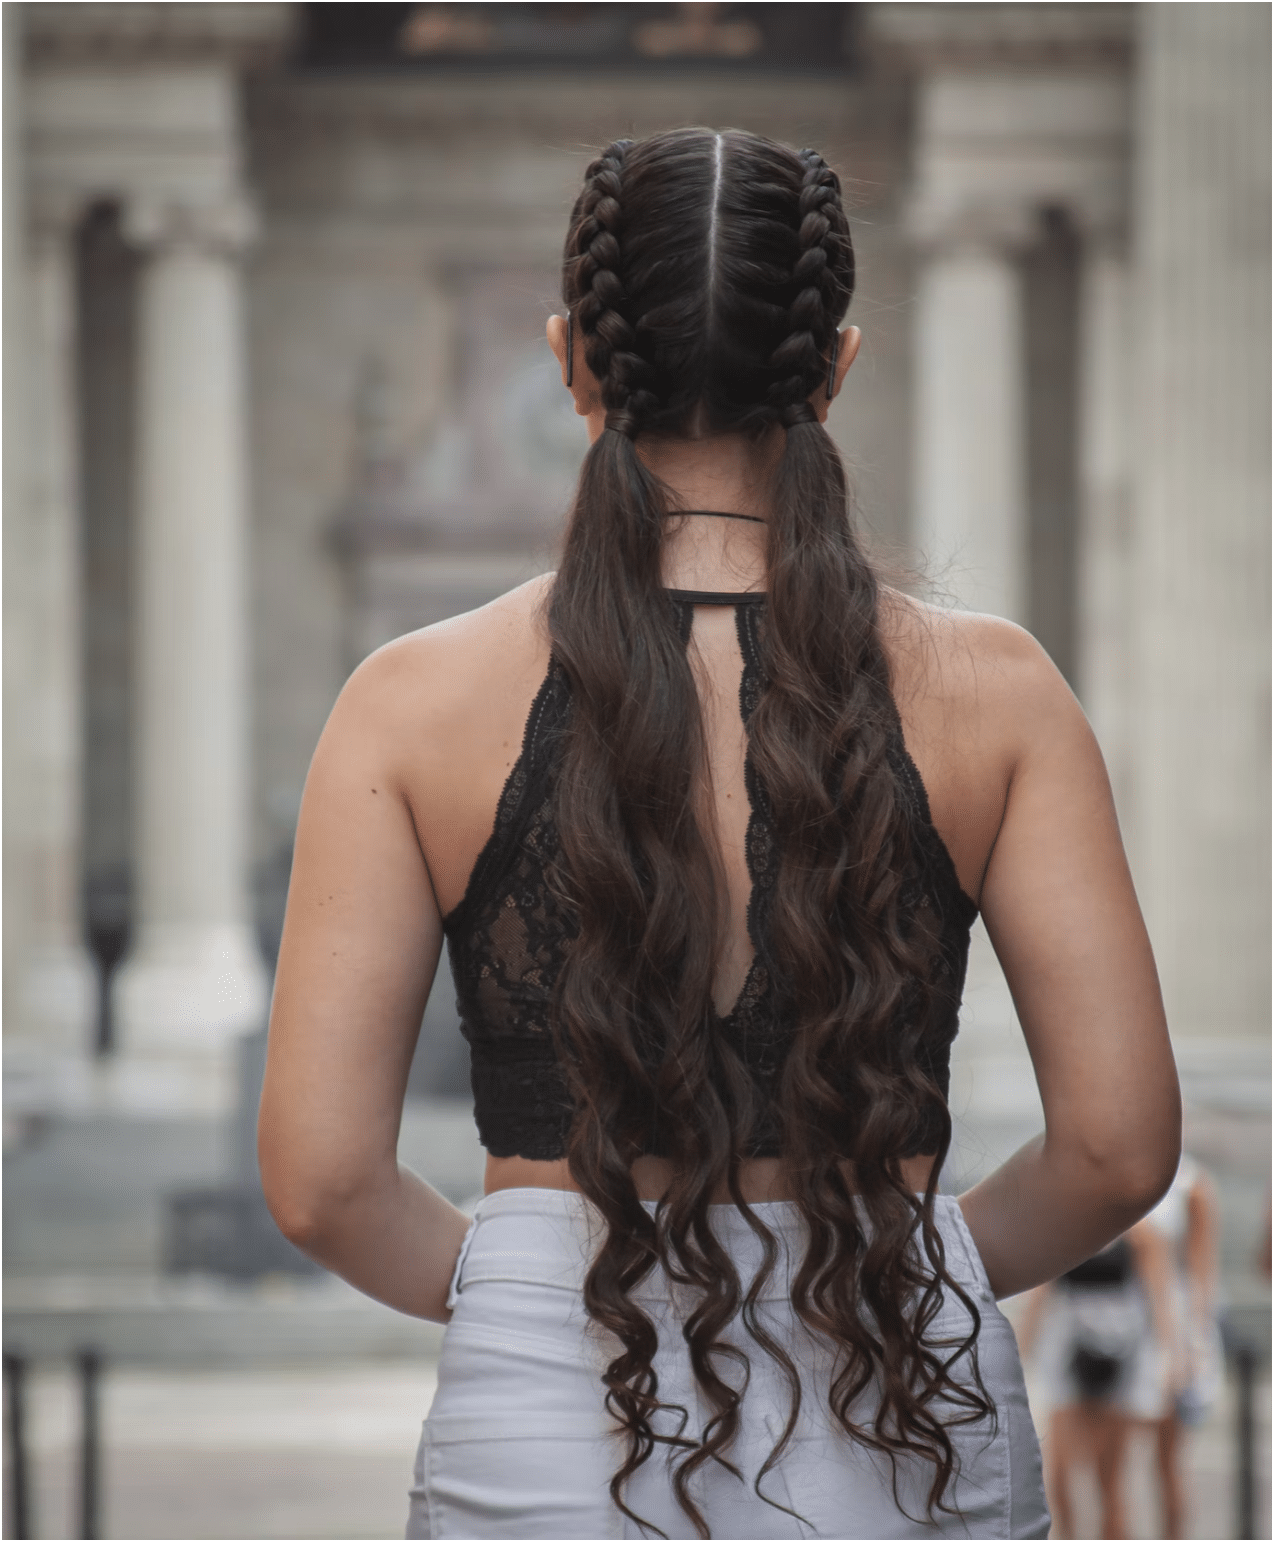 Is It a Sin to Braid Your Hair?